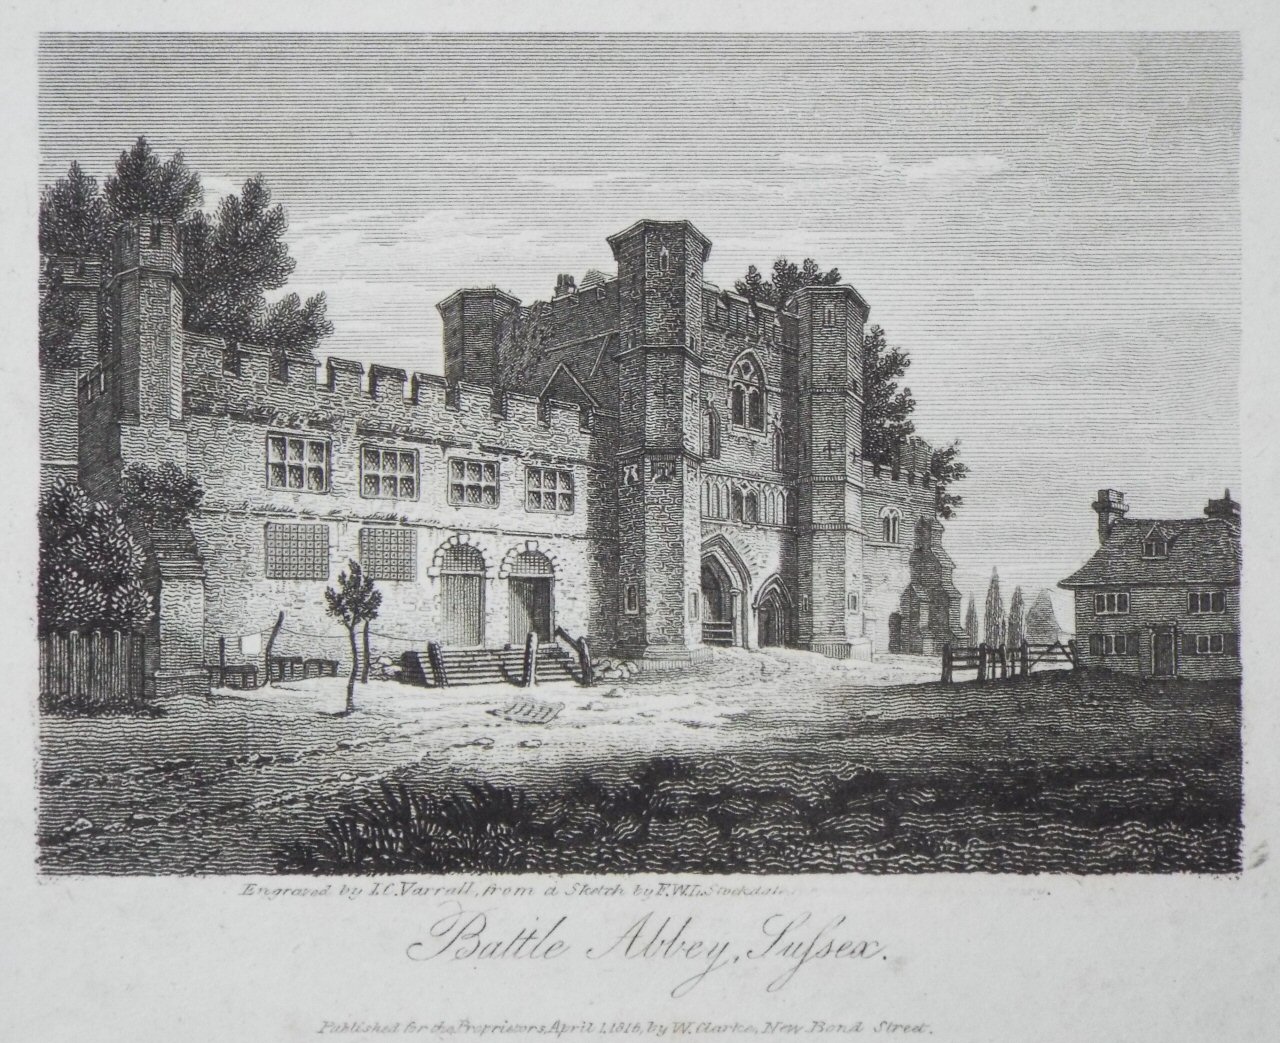 Print - Battle Abbey, Sussex. - Varrall